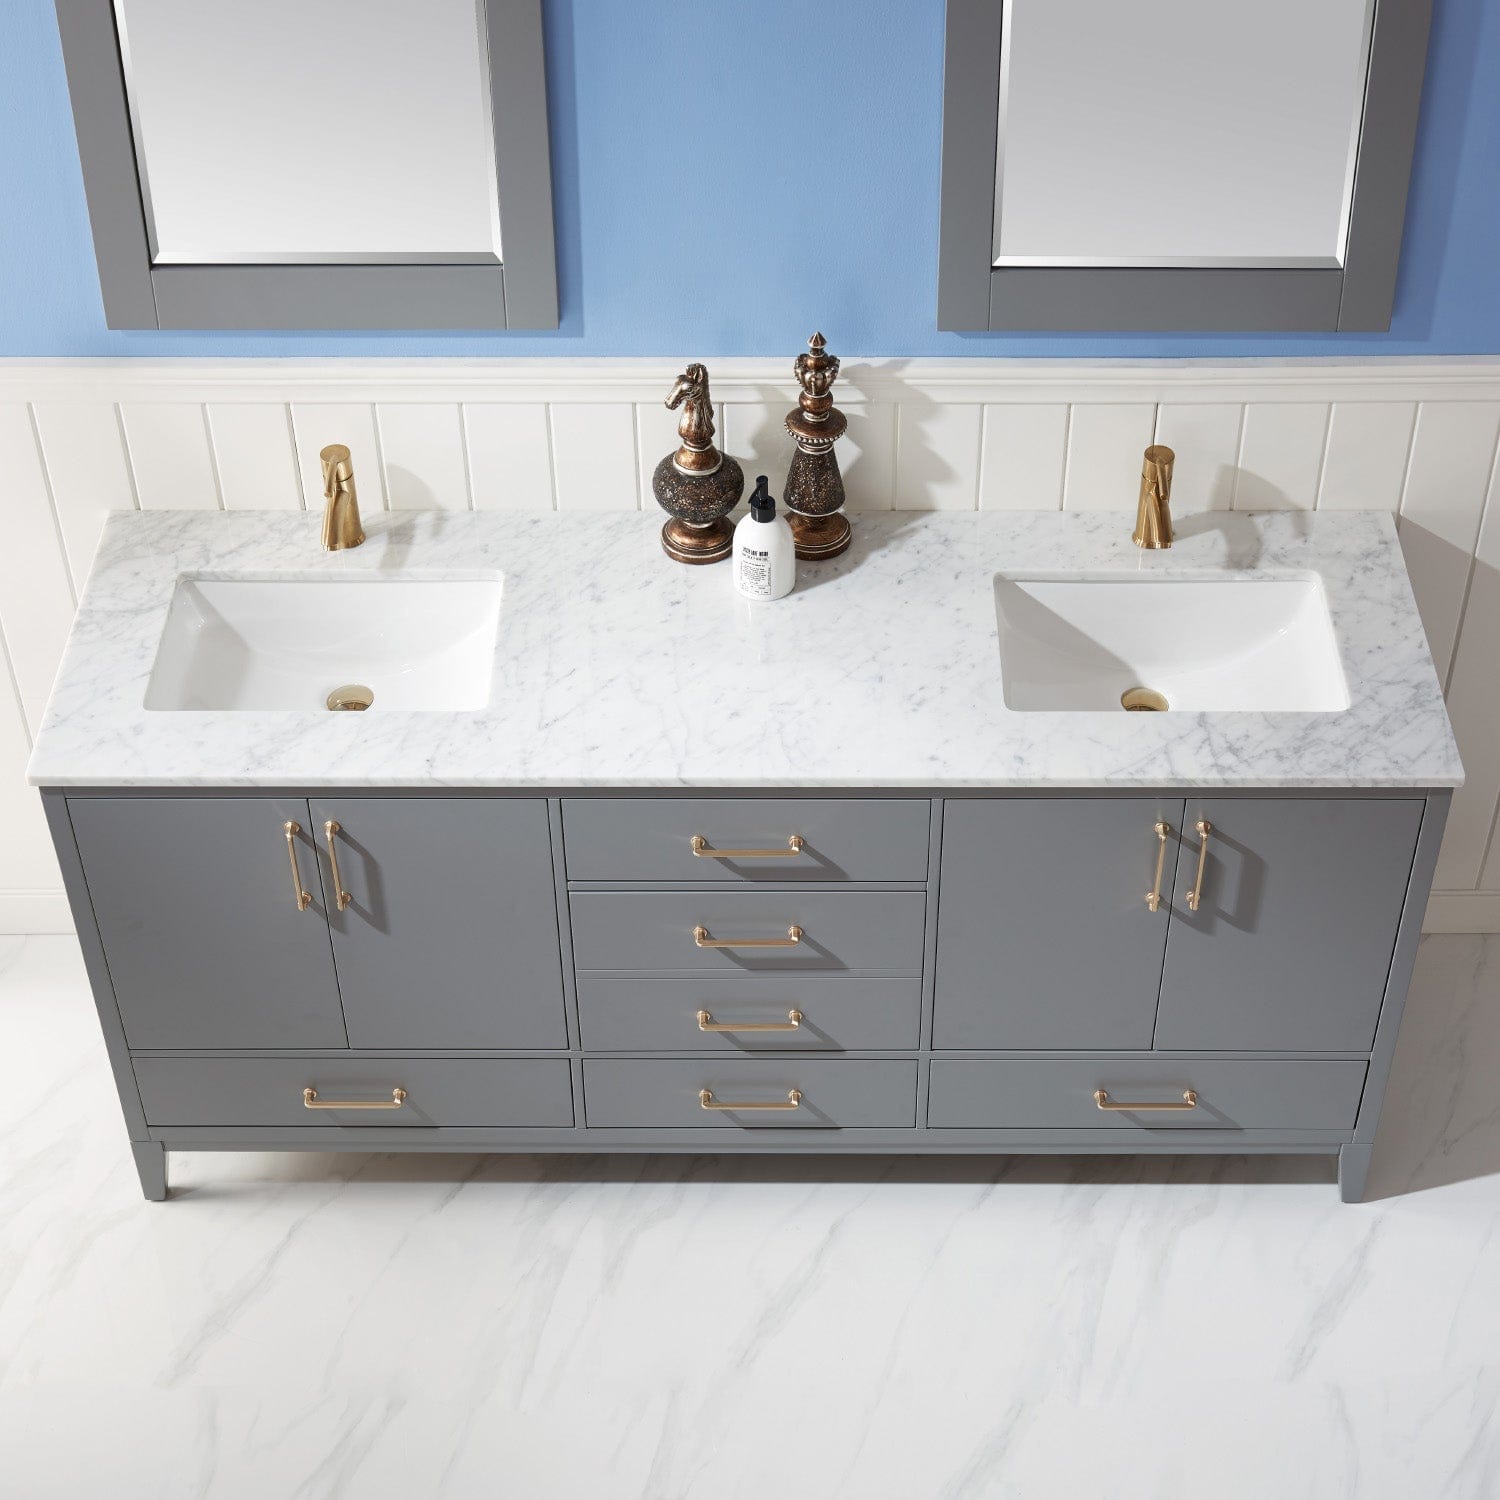 Altair Sutton 72" Double Bathroom Vanity Set in Gray and Carrara White Marble Countertop with Mirror 541072-GR-CA - Molaix631112971997Vanity541072-GR-CA